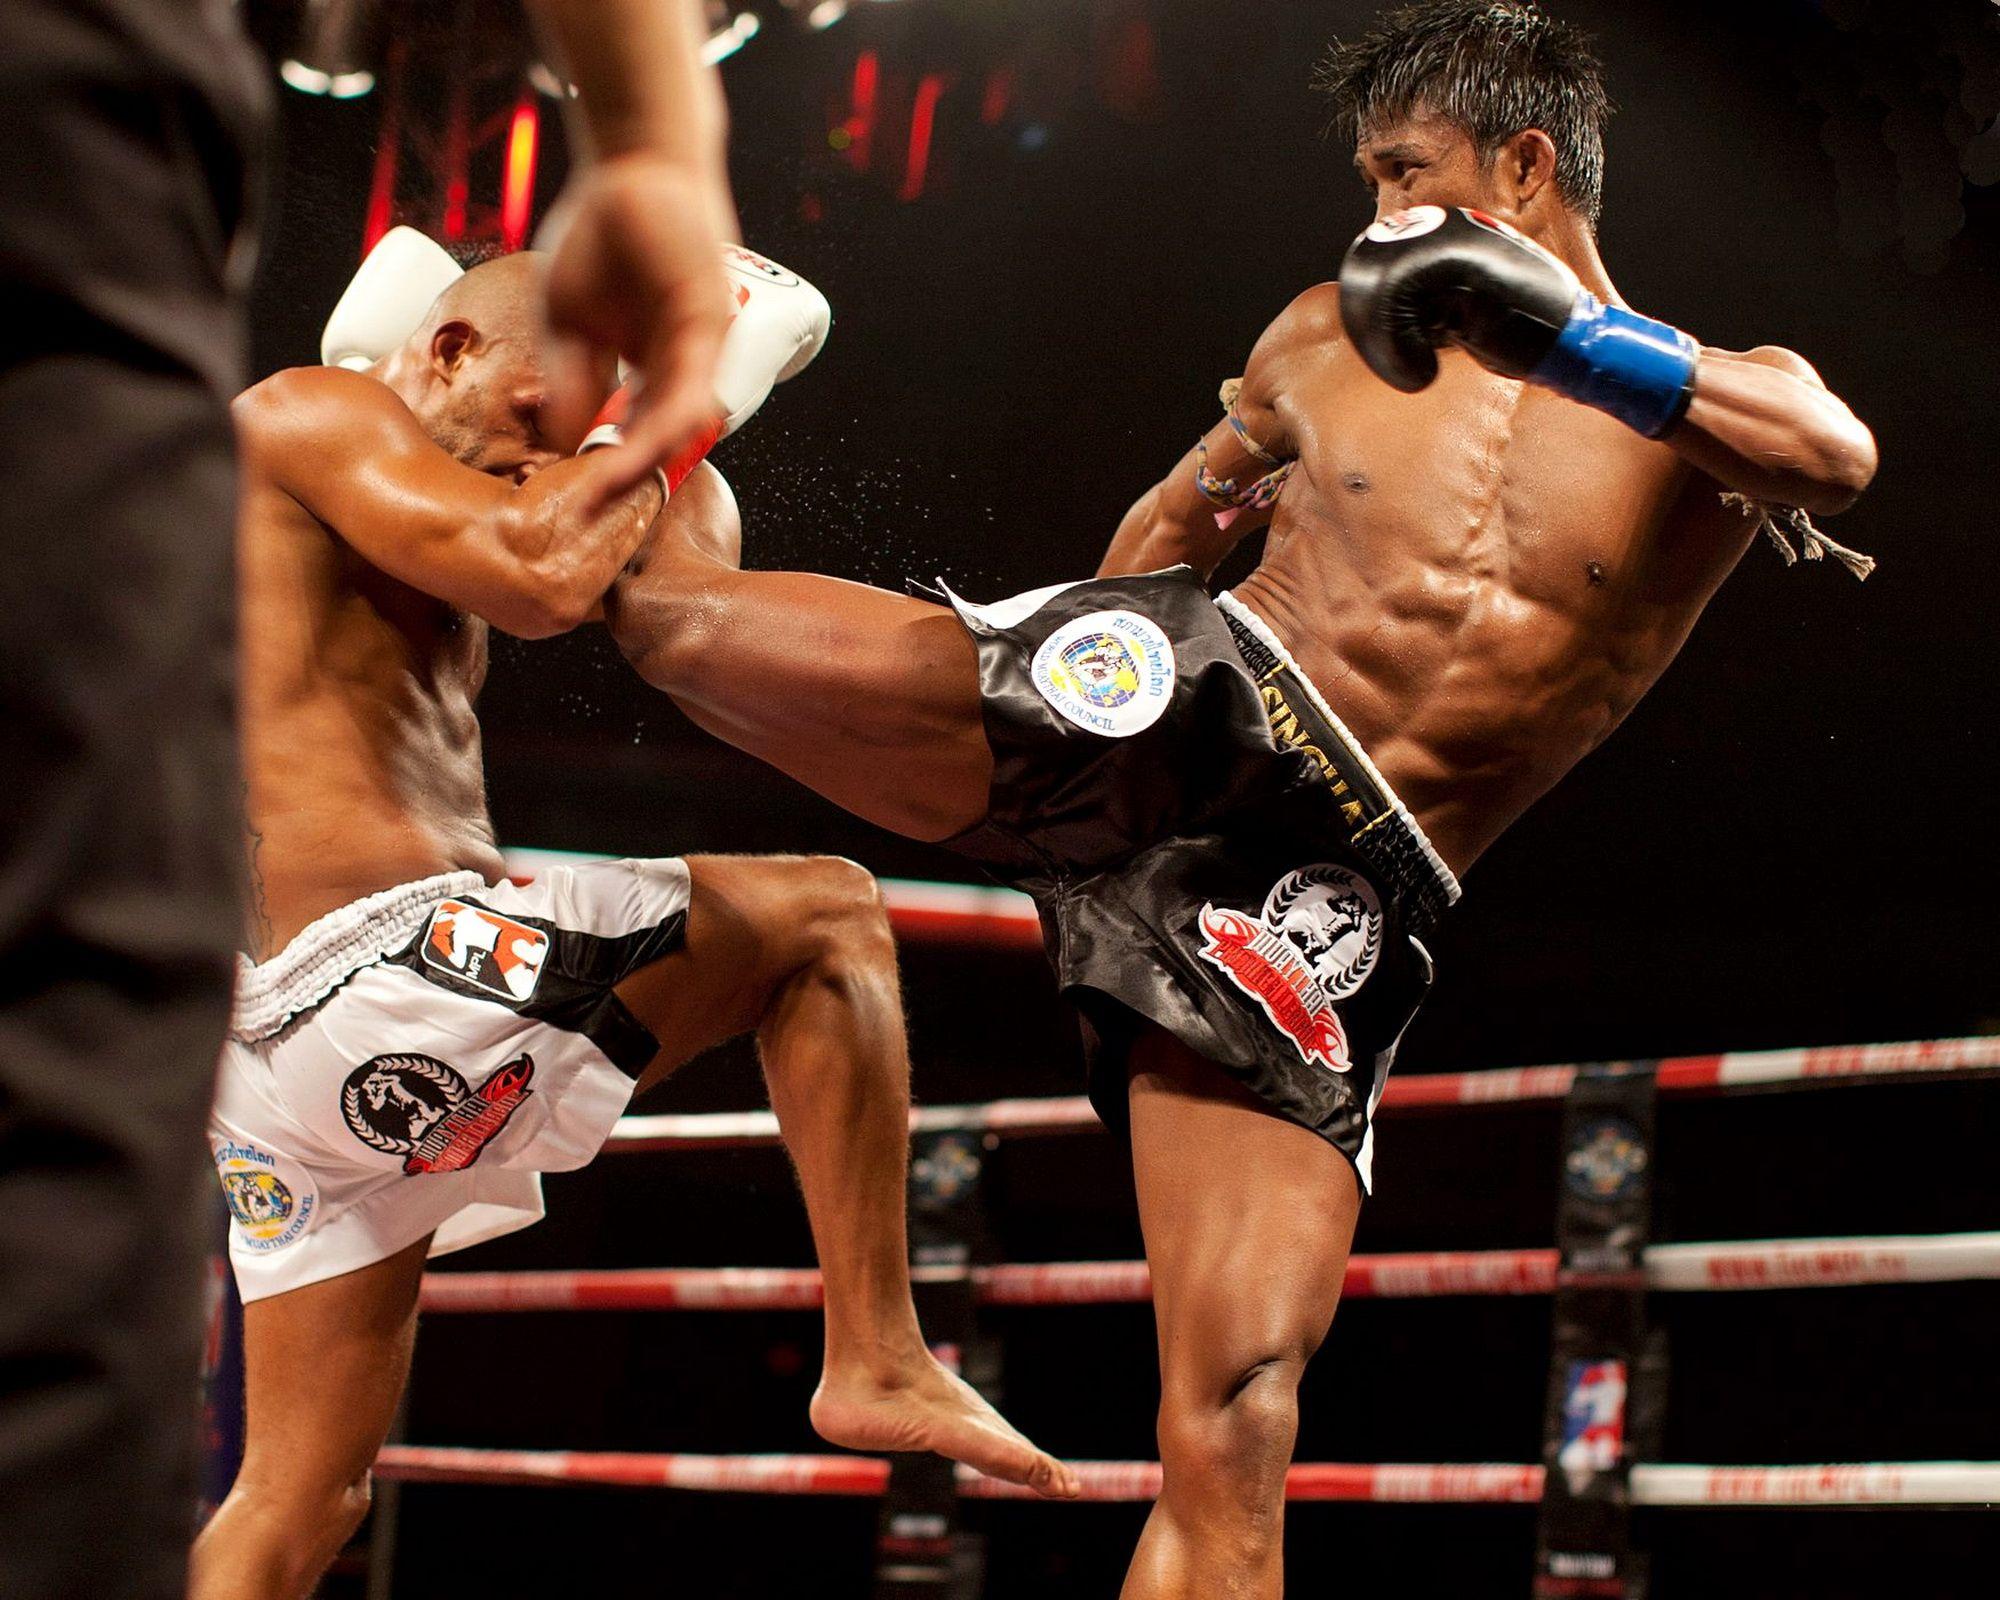 Buakaw Banchamek (Por. Pramuk) is certainly the most well known Muay